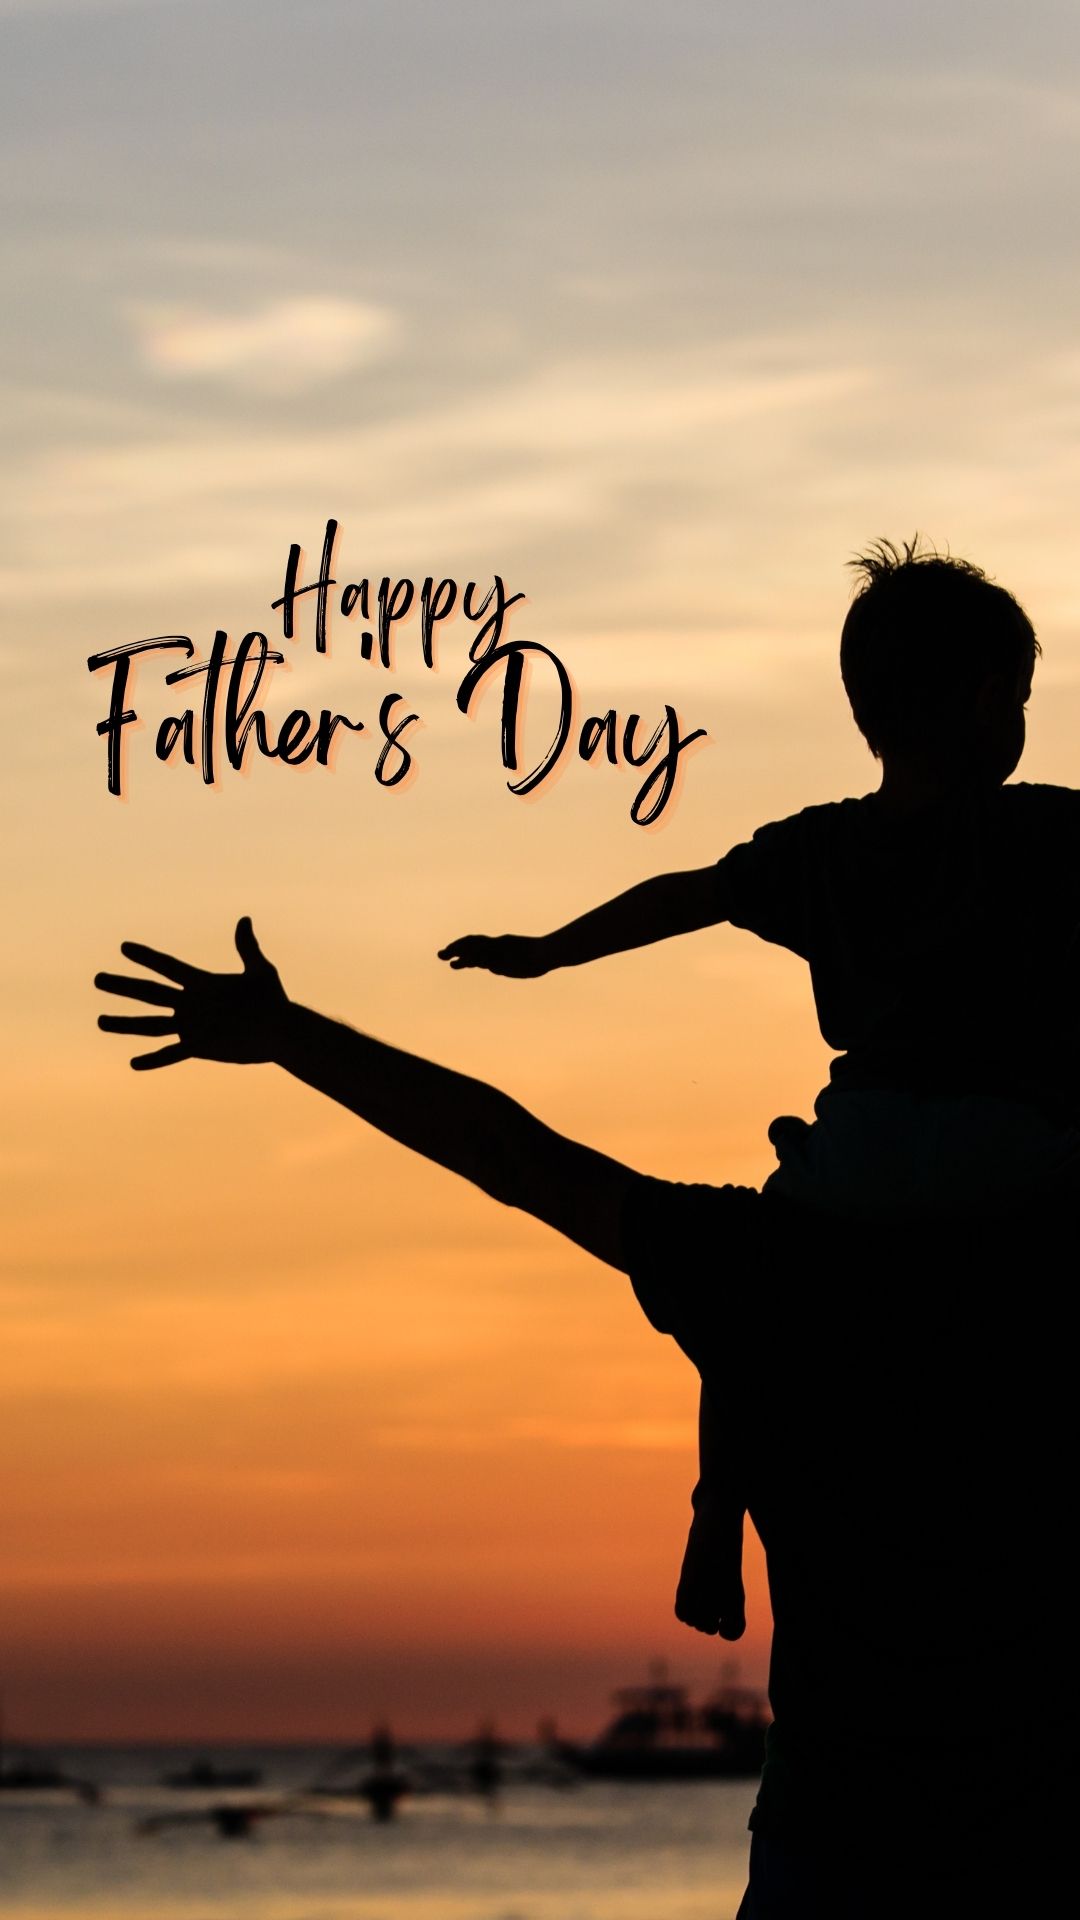 best happy father's day wishes images for instagram story (15)